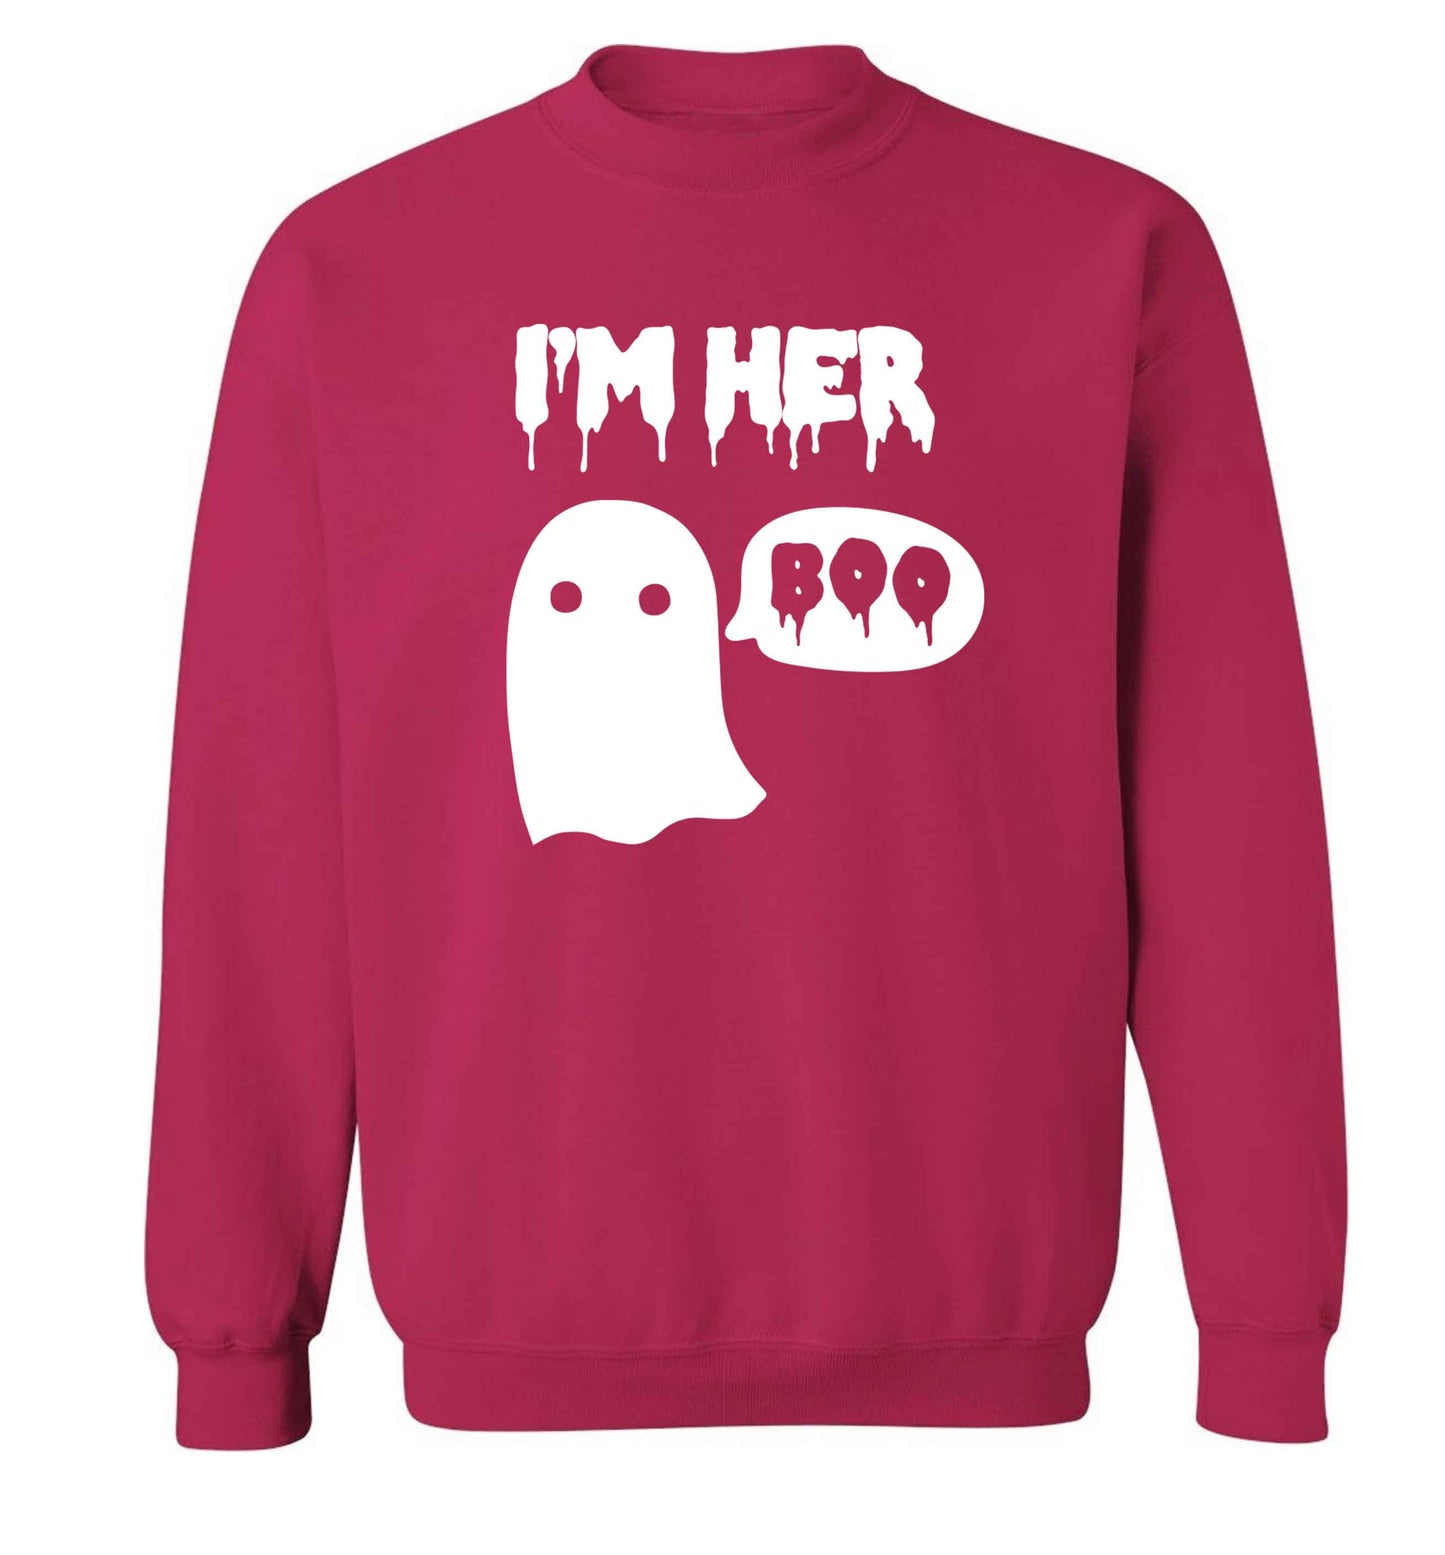 I'm her boo adult's unisex pink sweater 2XL